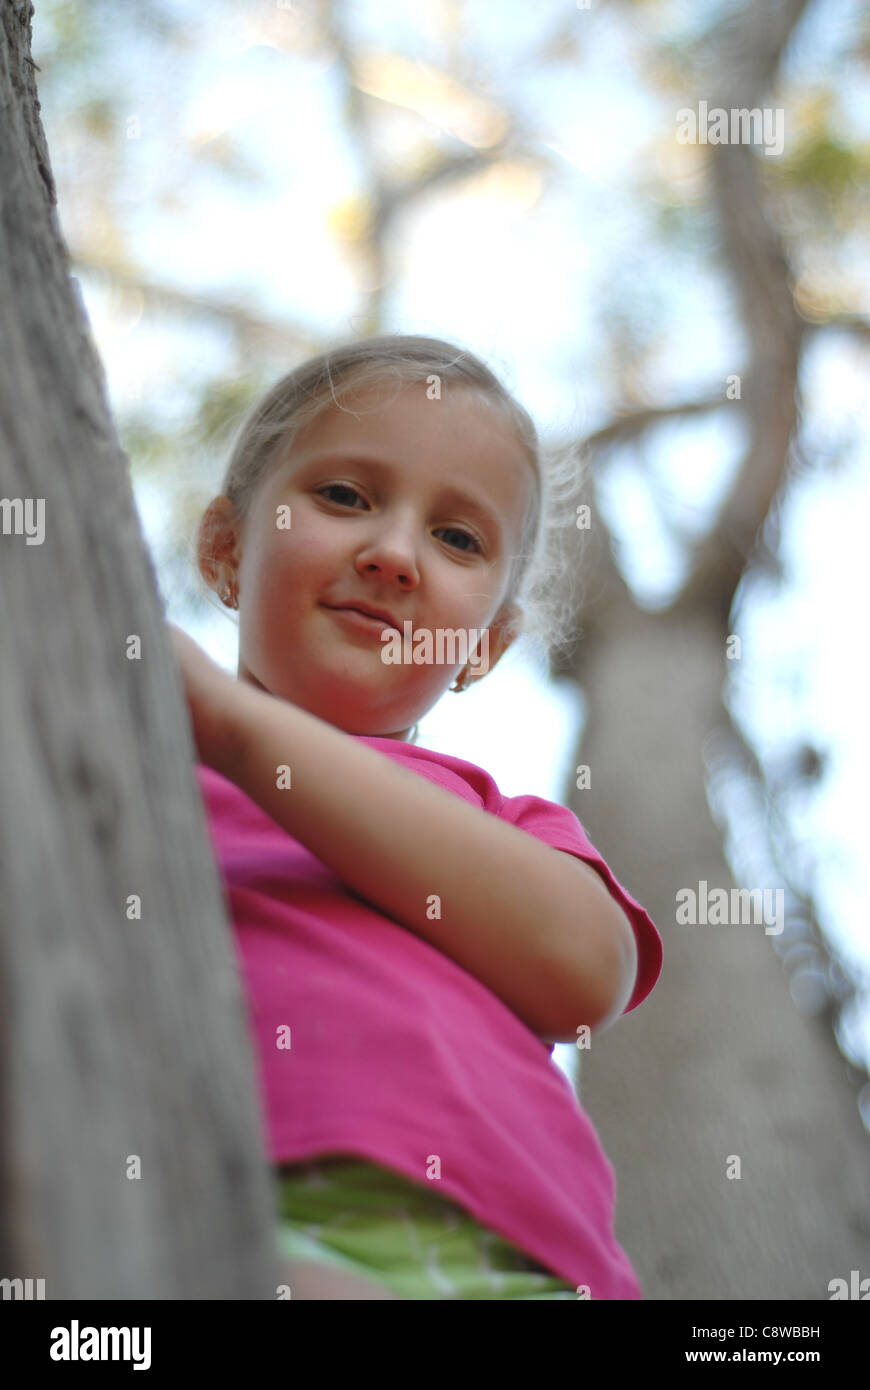 baby background blond child children girl poses woman young nice Stock Photo